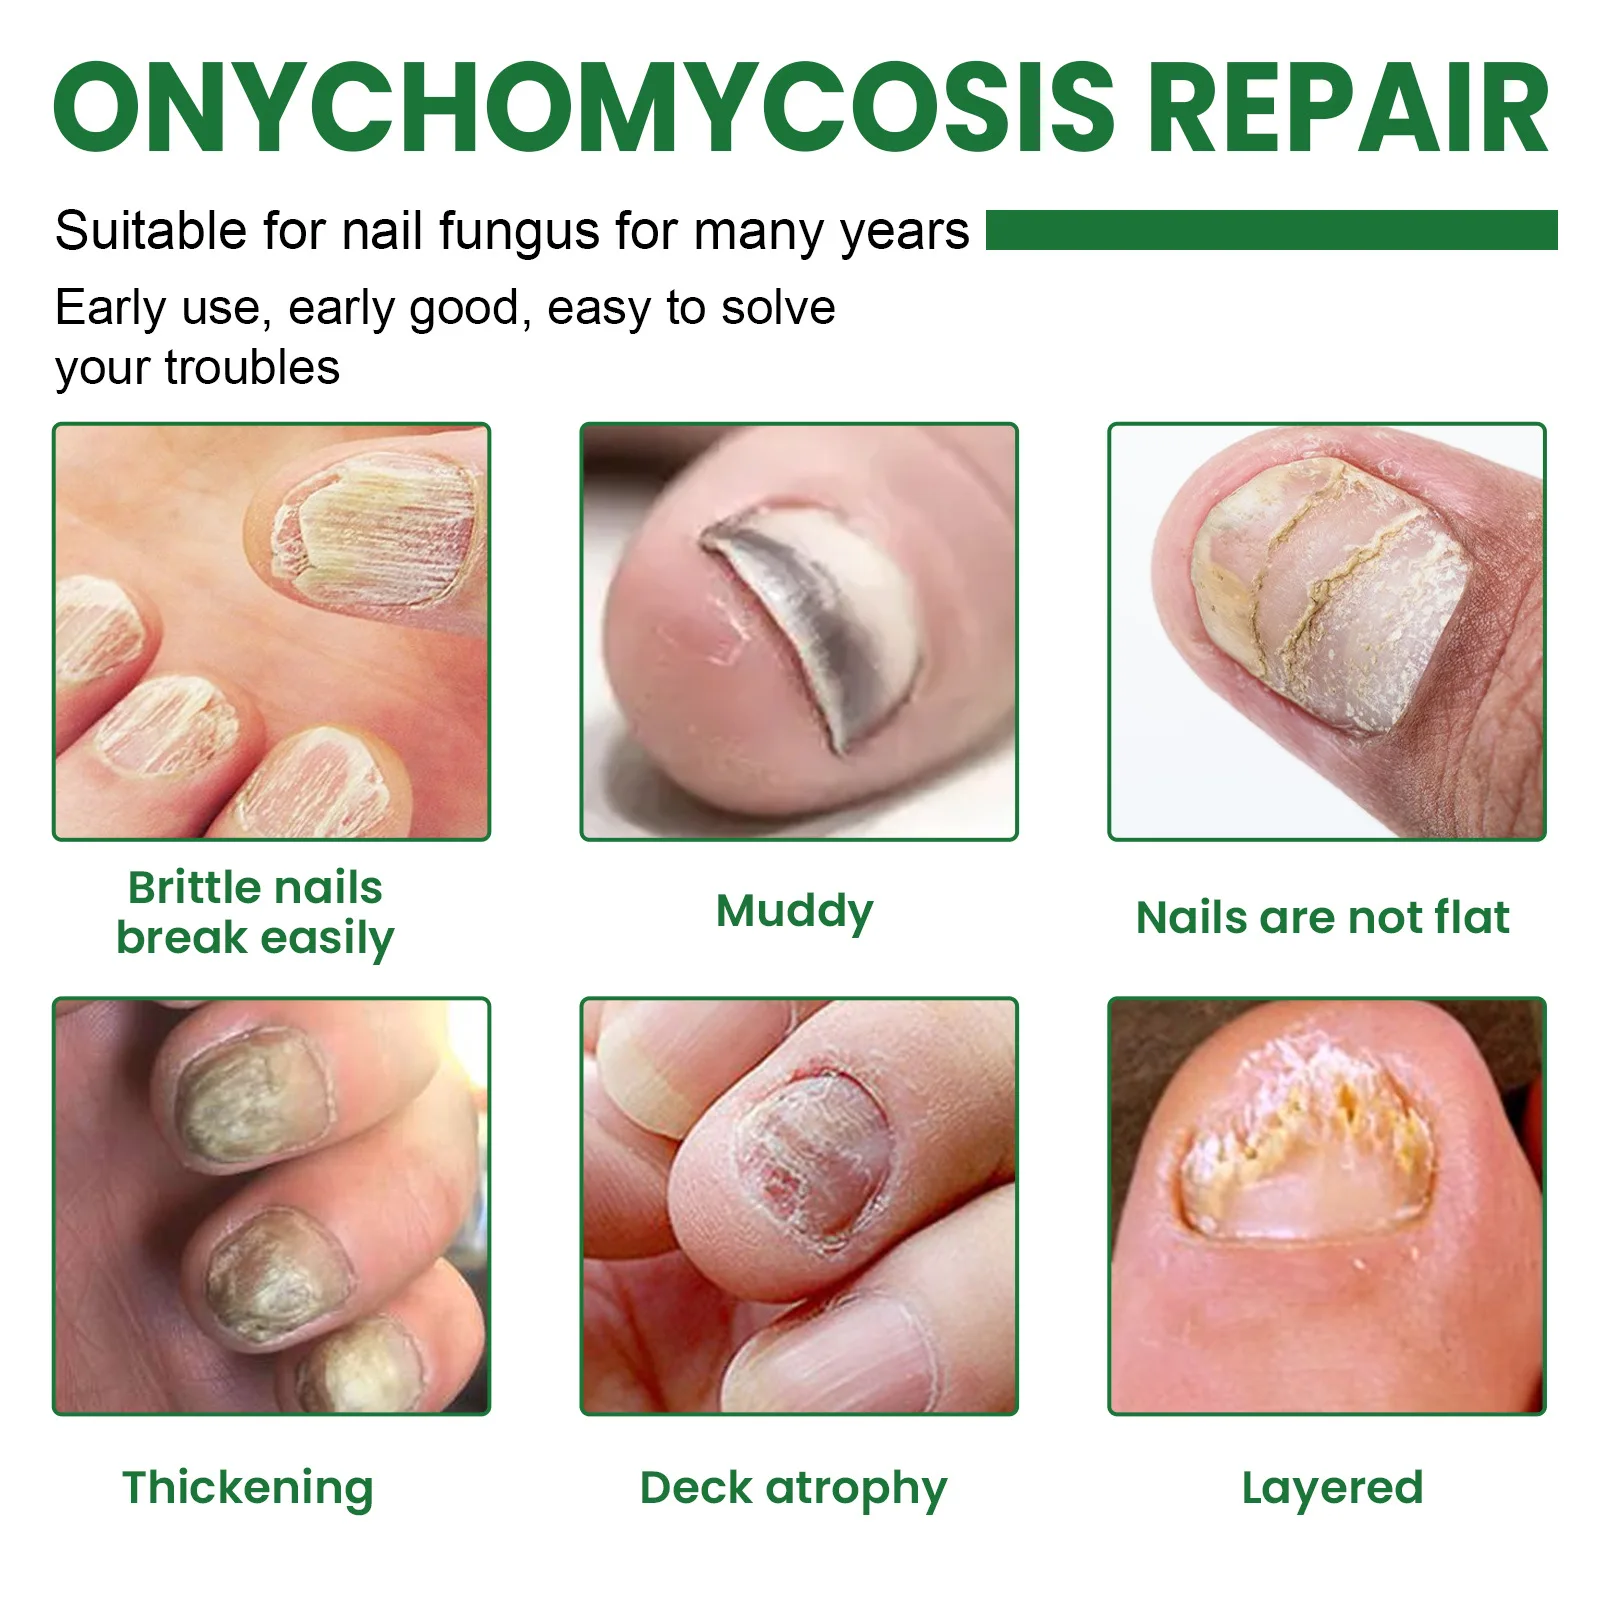 Fungal Nail Infection and Damage on Human Hand. Finger with Onychomycosis,  Disgusting Bitten Fingernails on Man`s Hand Stock Image - Image of damage,  antimycotic: 92516765